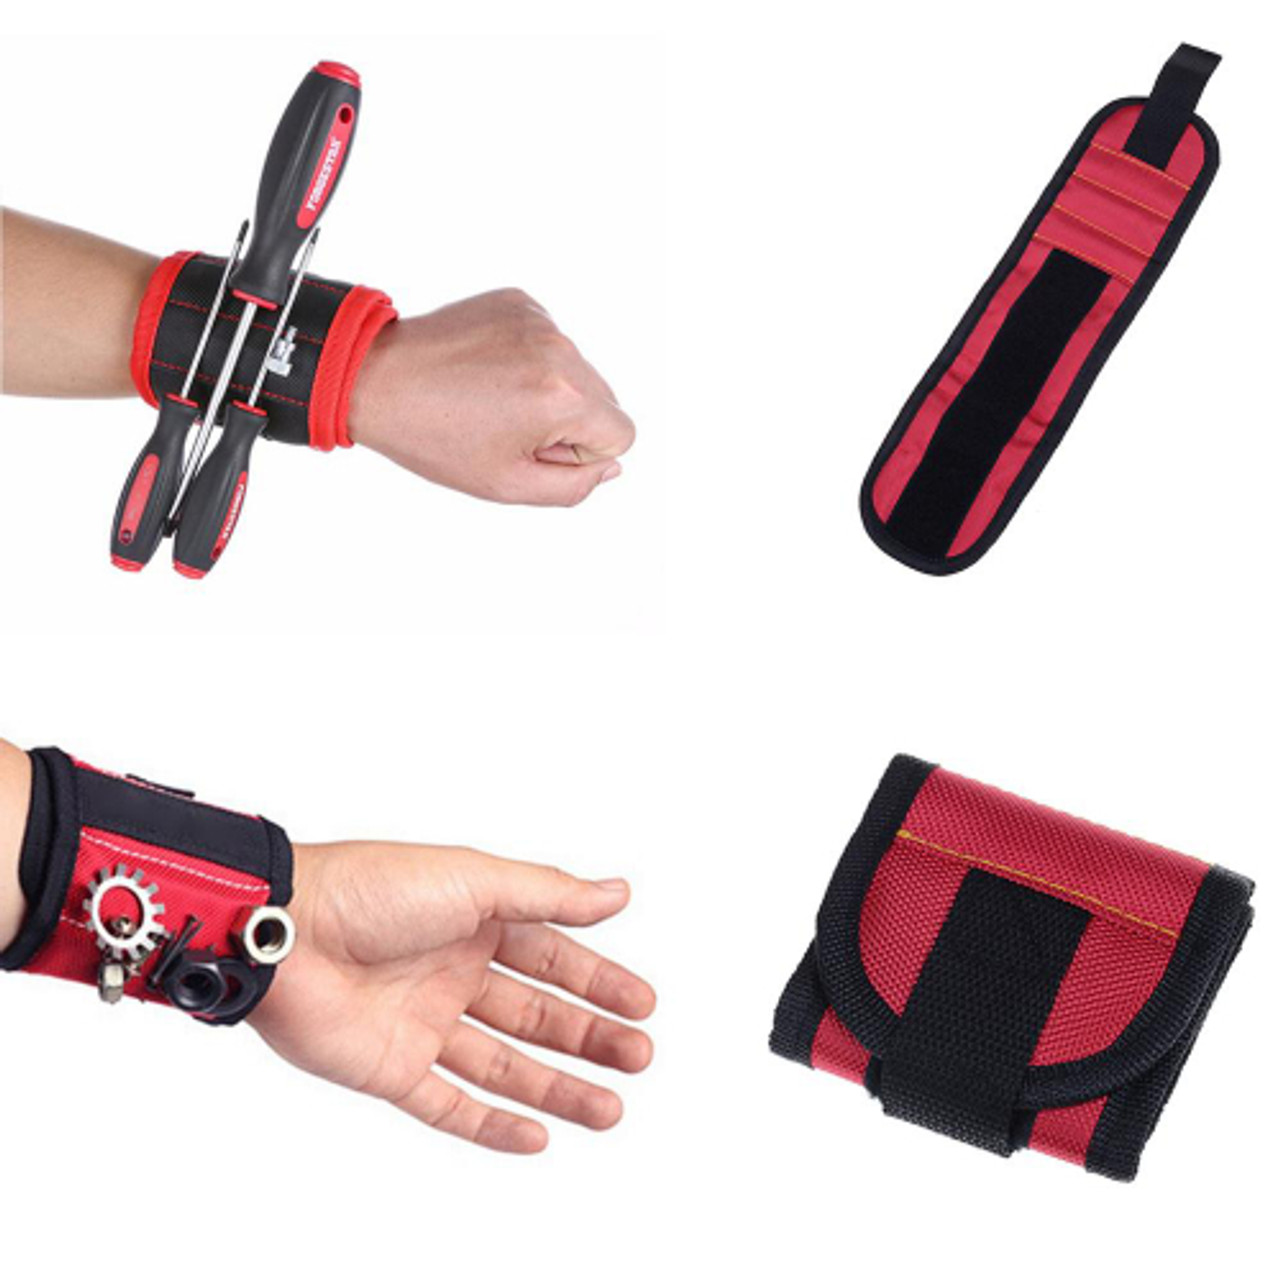 USA Made Strong Magnetic Wristband Tool Belt with for Holder Holding Screws